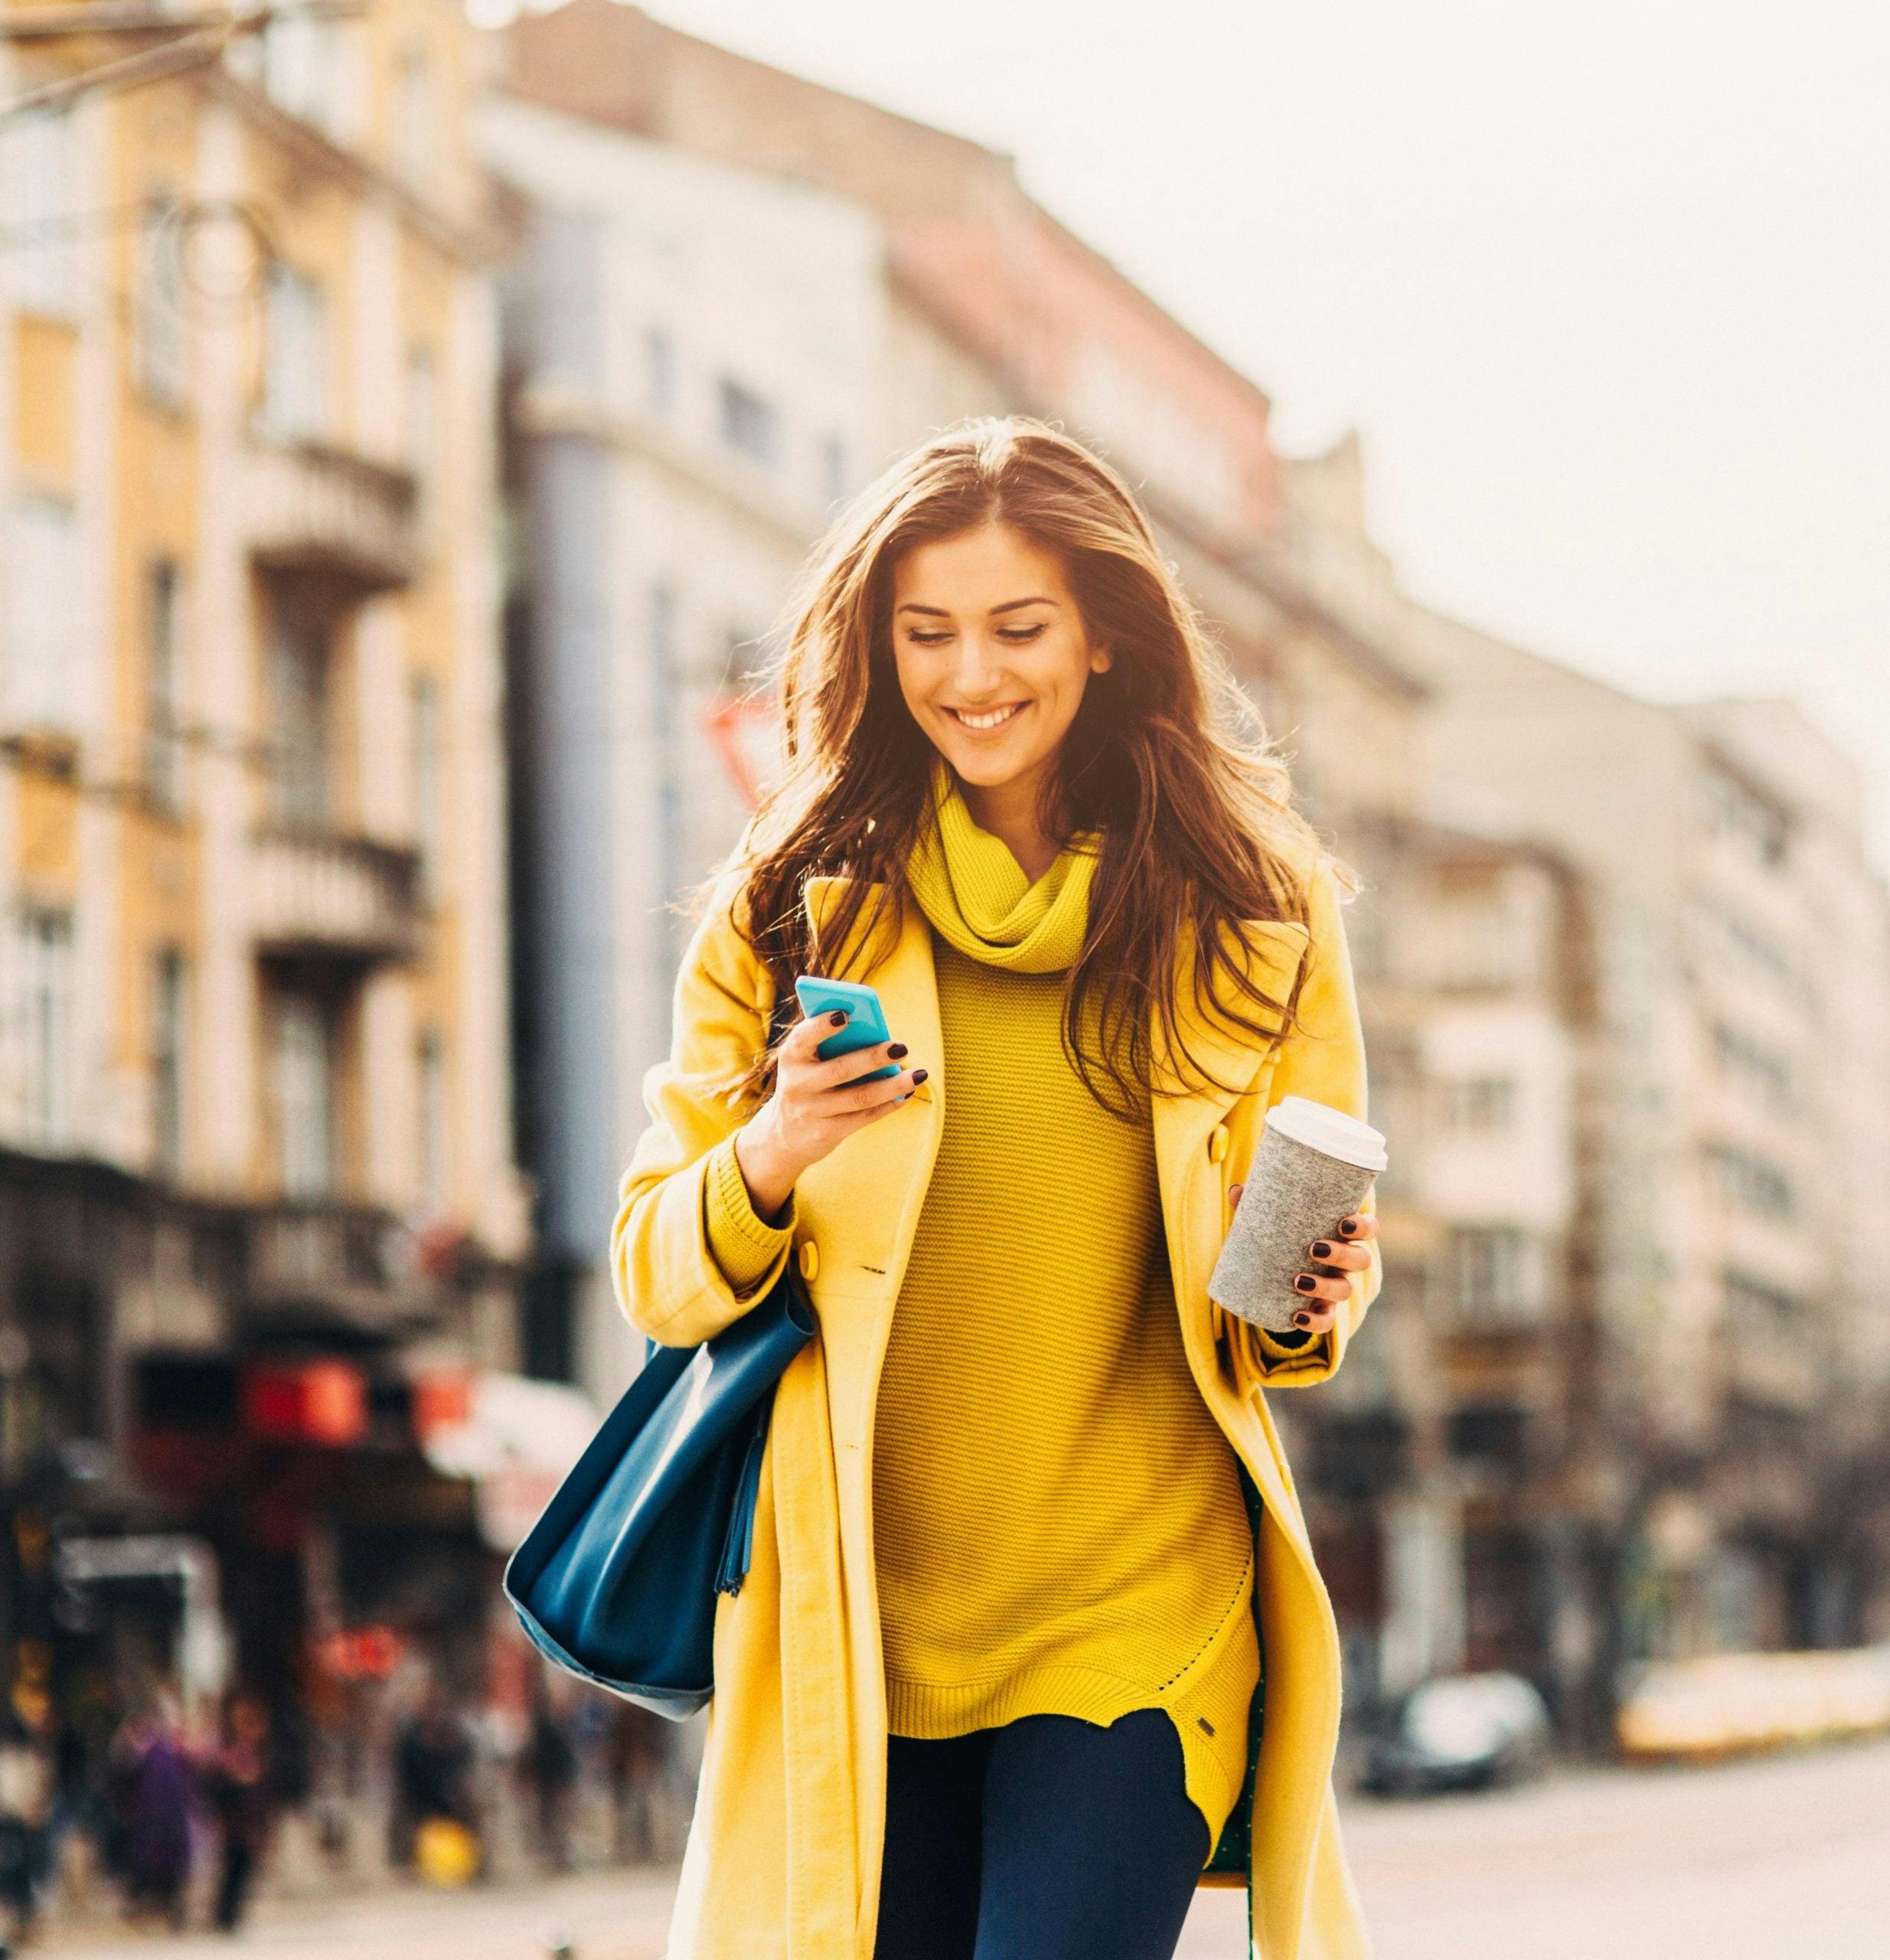 Smiling woman in yellow clothes holding a phone